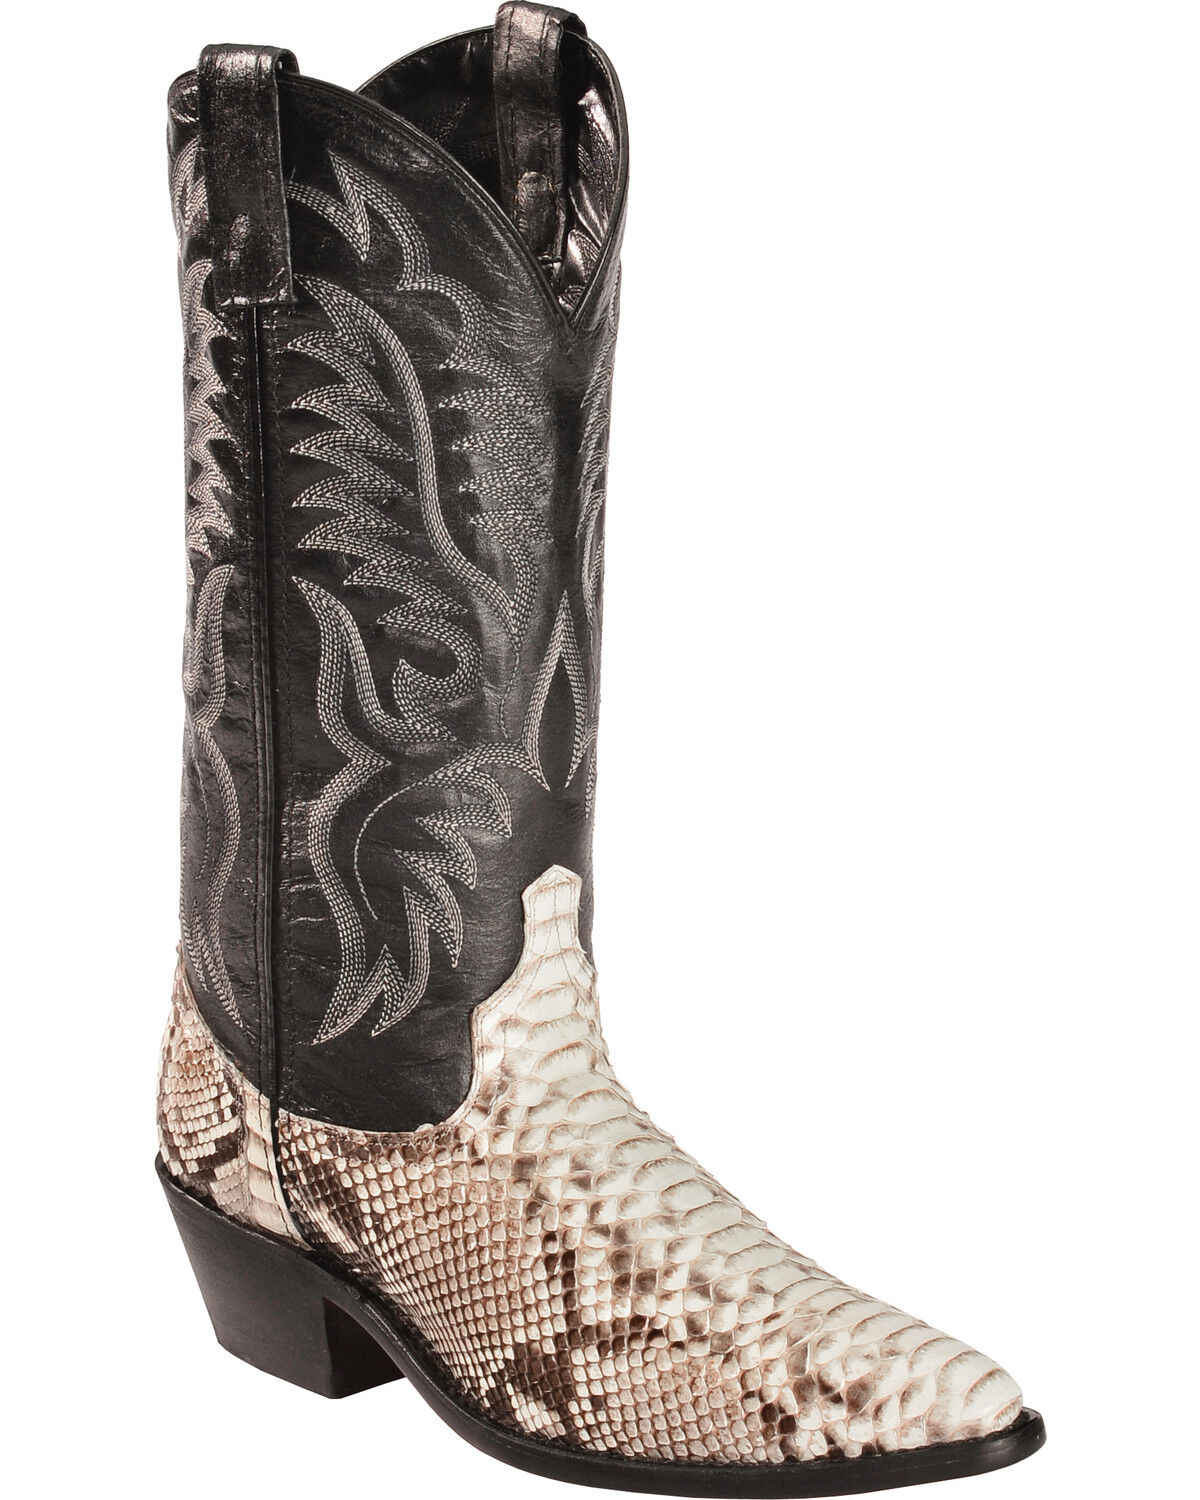 copperhead snake skin boots